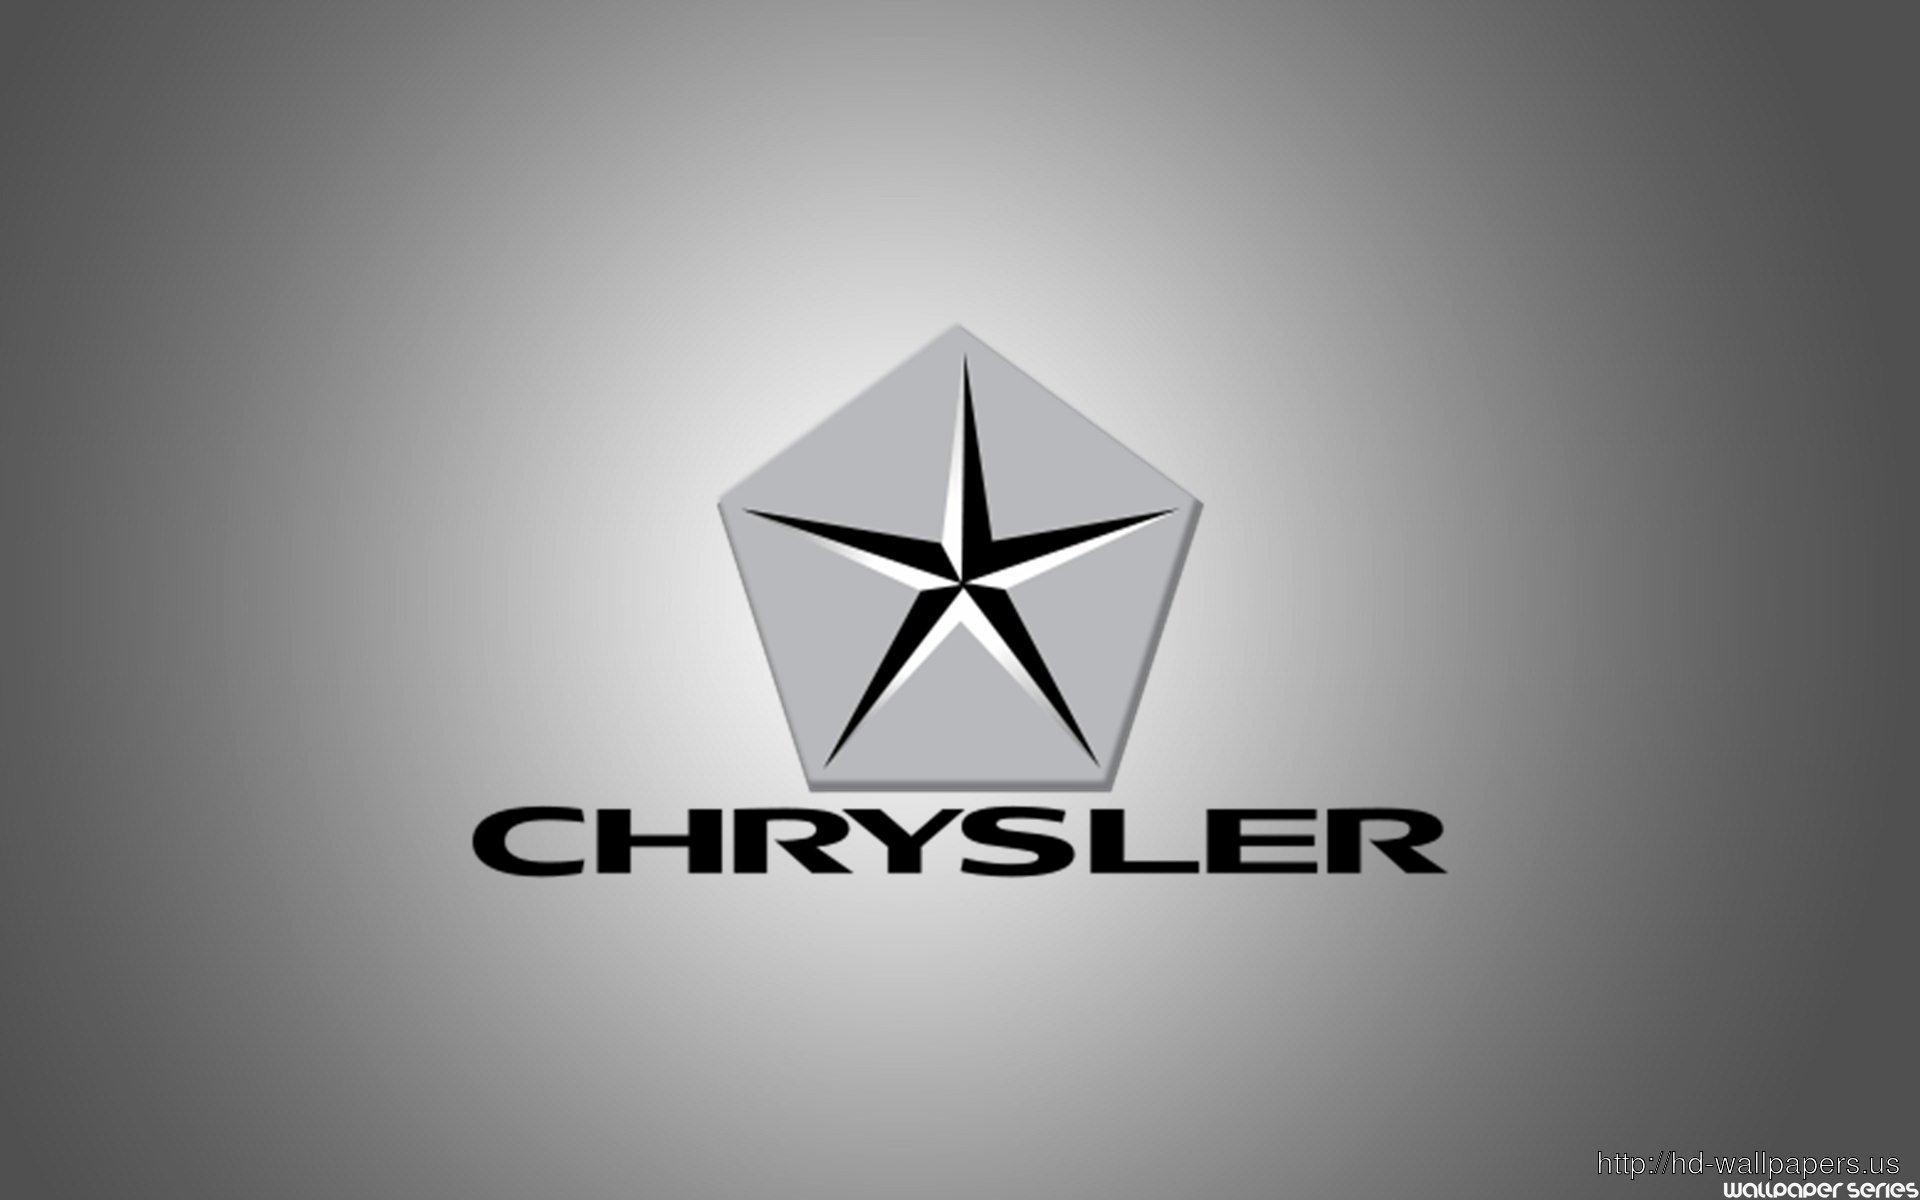 Chrysler Logo Free Download Hd Wallpapers - Graphic Design , HD Wallpaper & Backgrounds